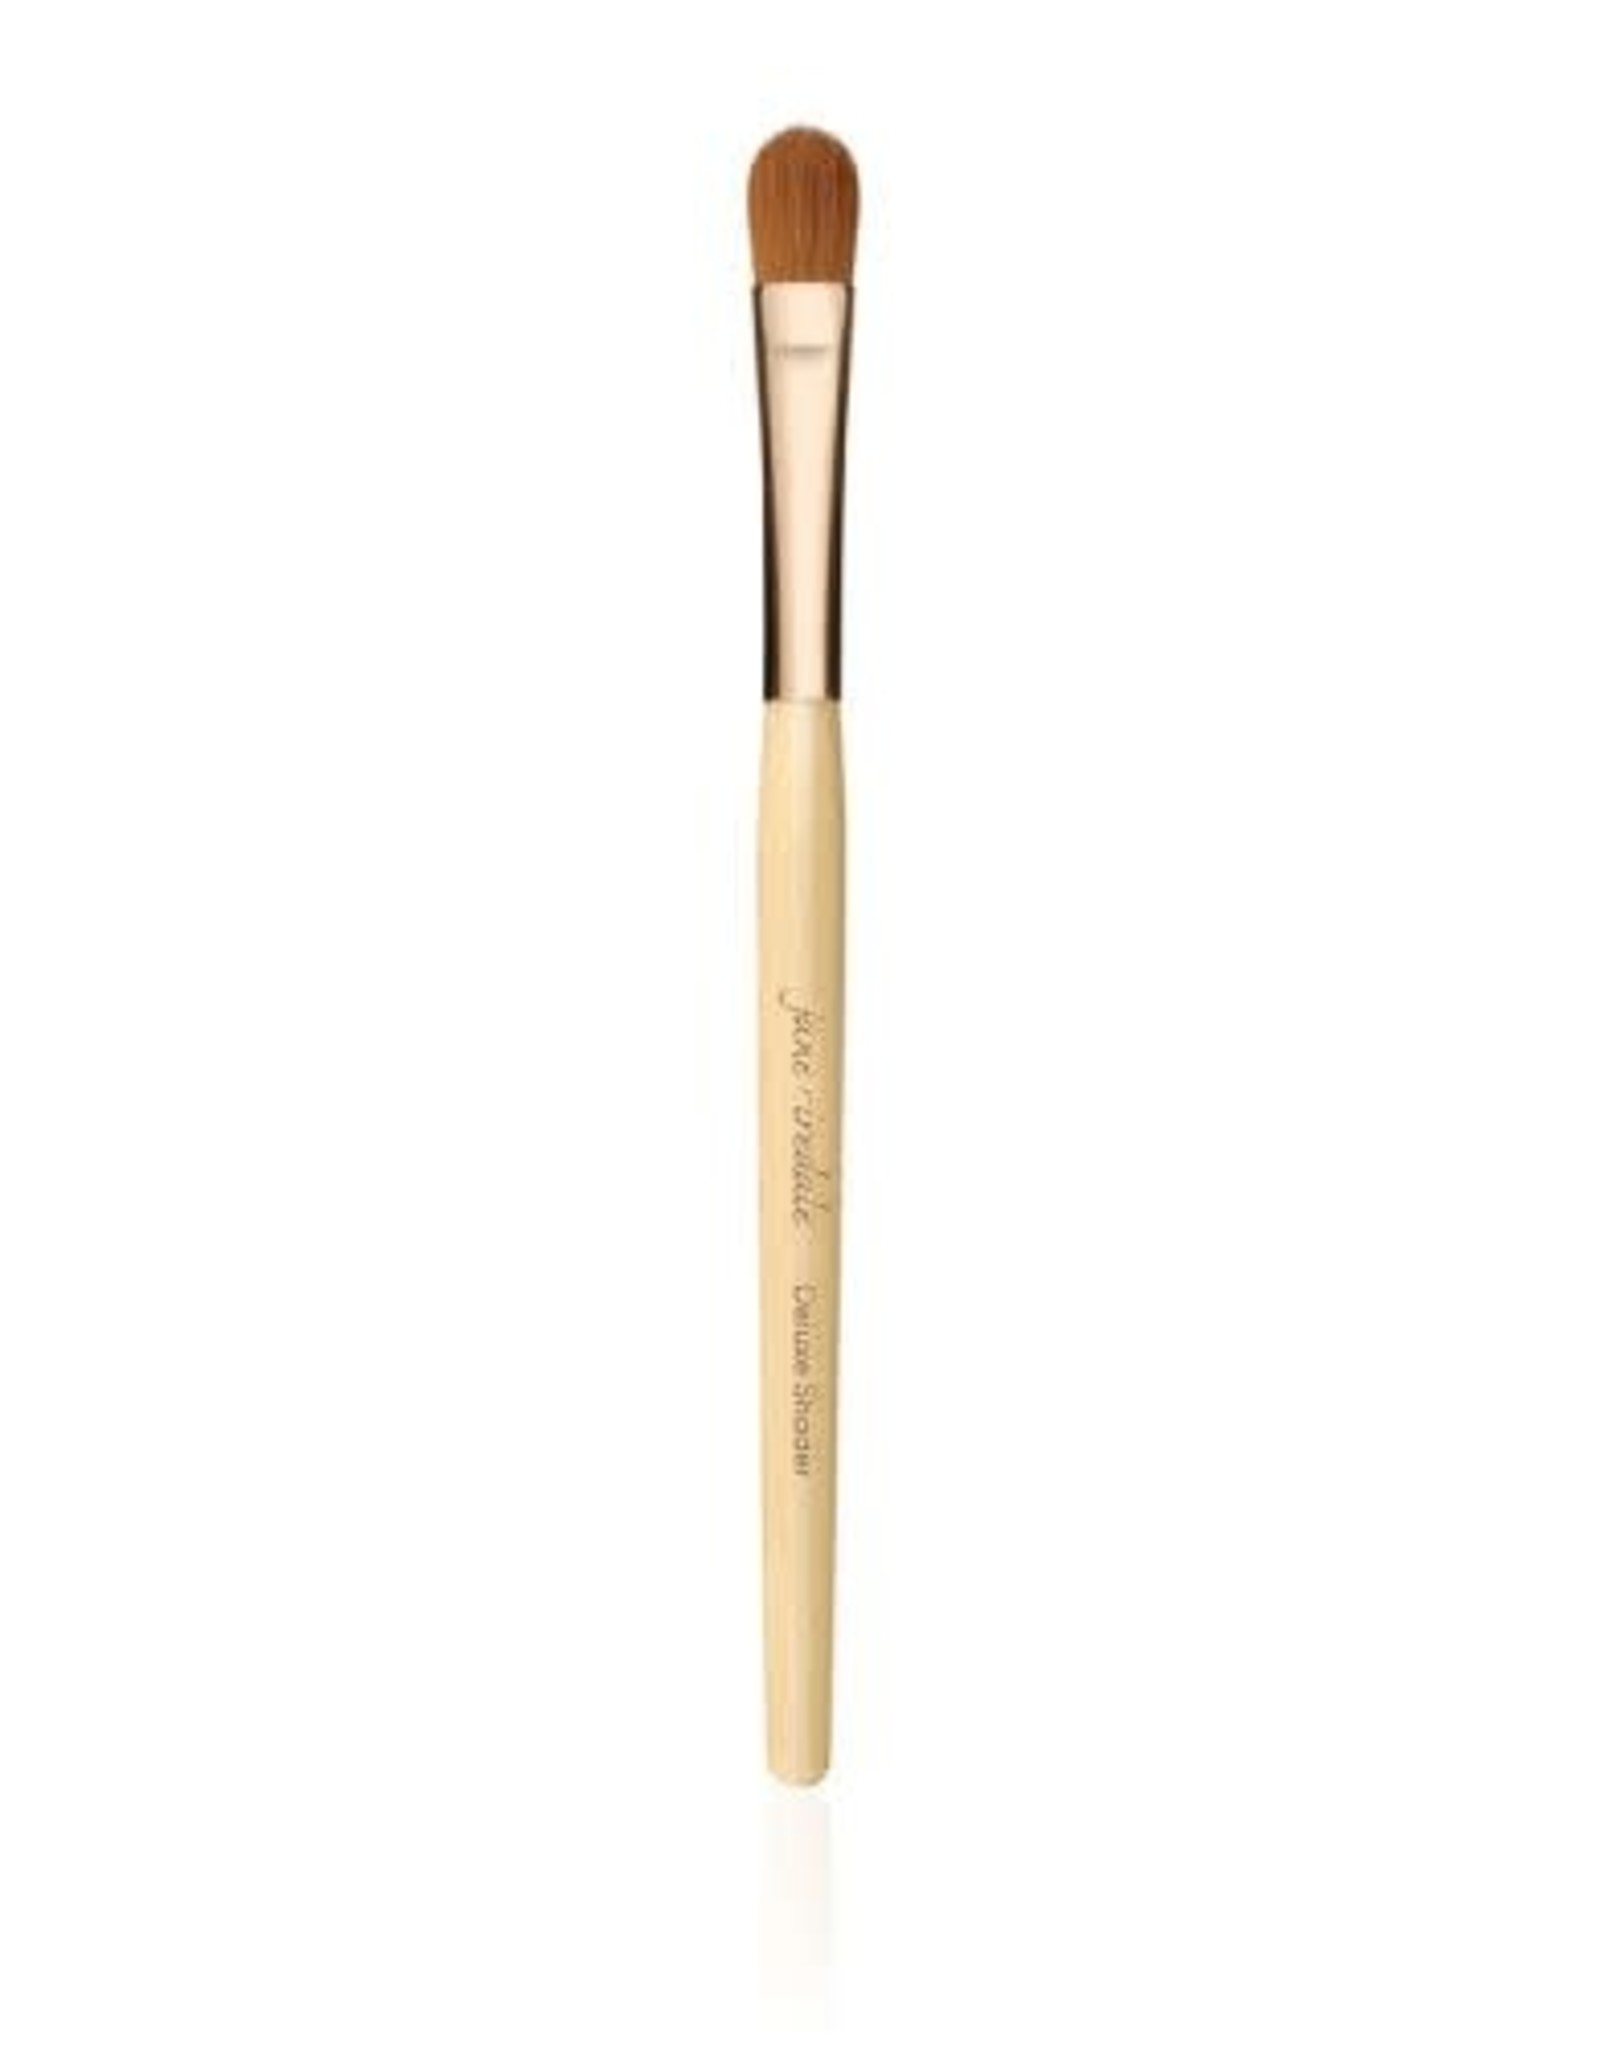 Jane Iredale Makeup Brush | Deluxe Shader